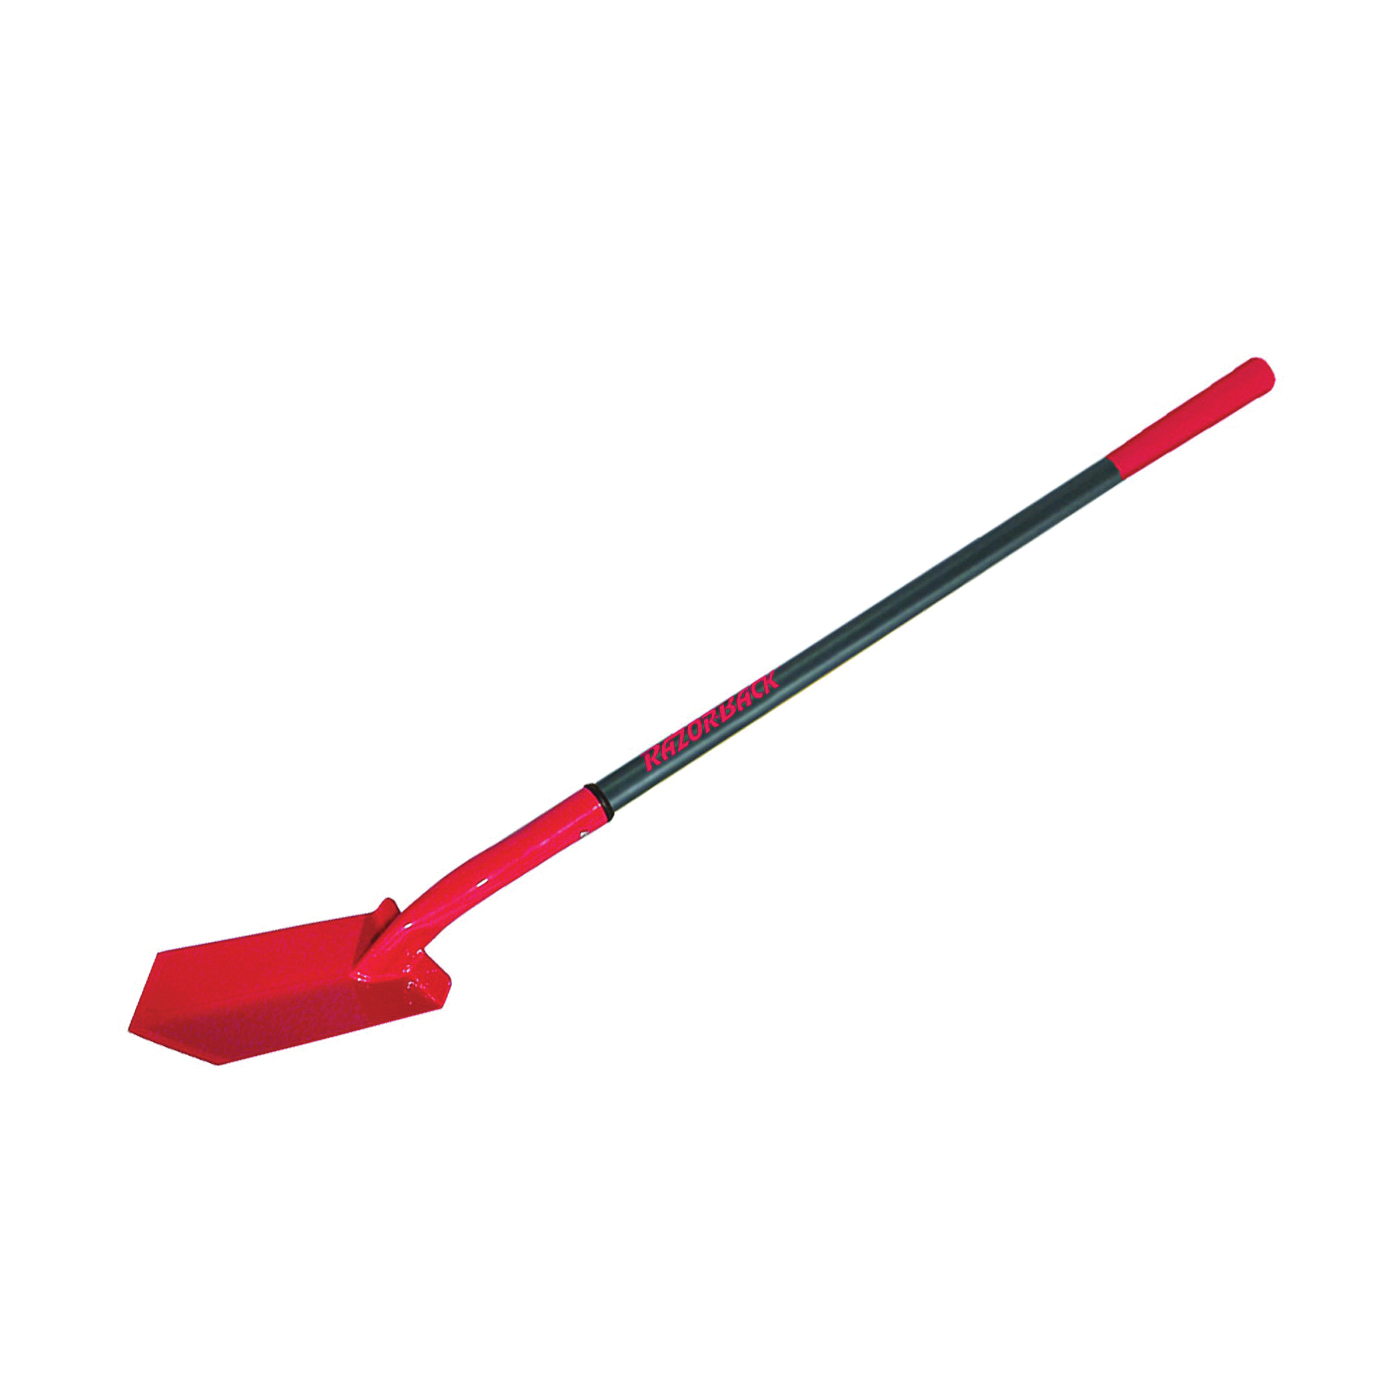 47035 Trenching Shovel, 5 in W Blade, Steel Blade, Fiberglass Handle, Extra Long Handle, 43 in L Handle